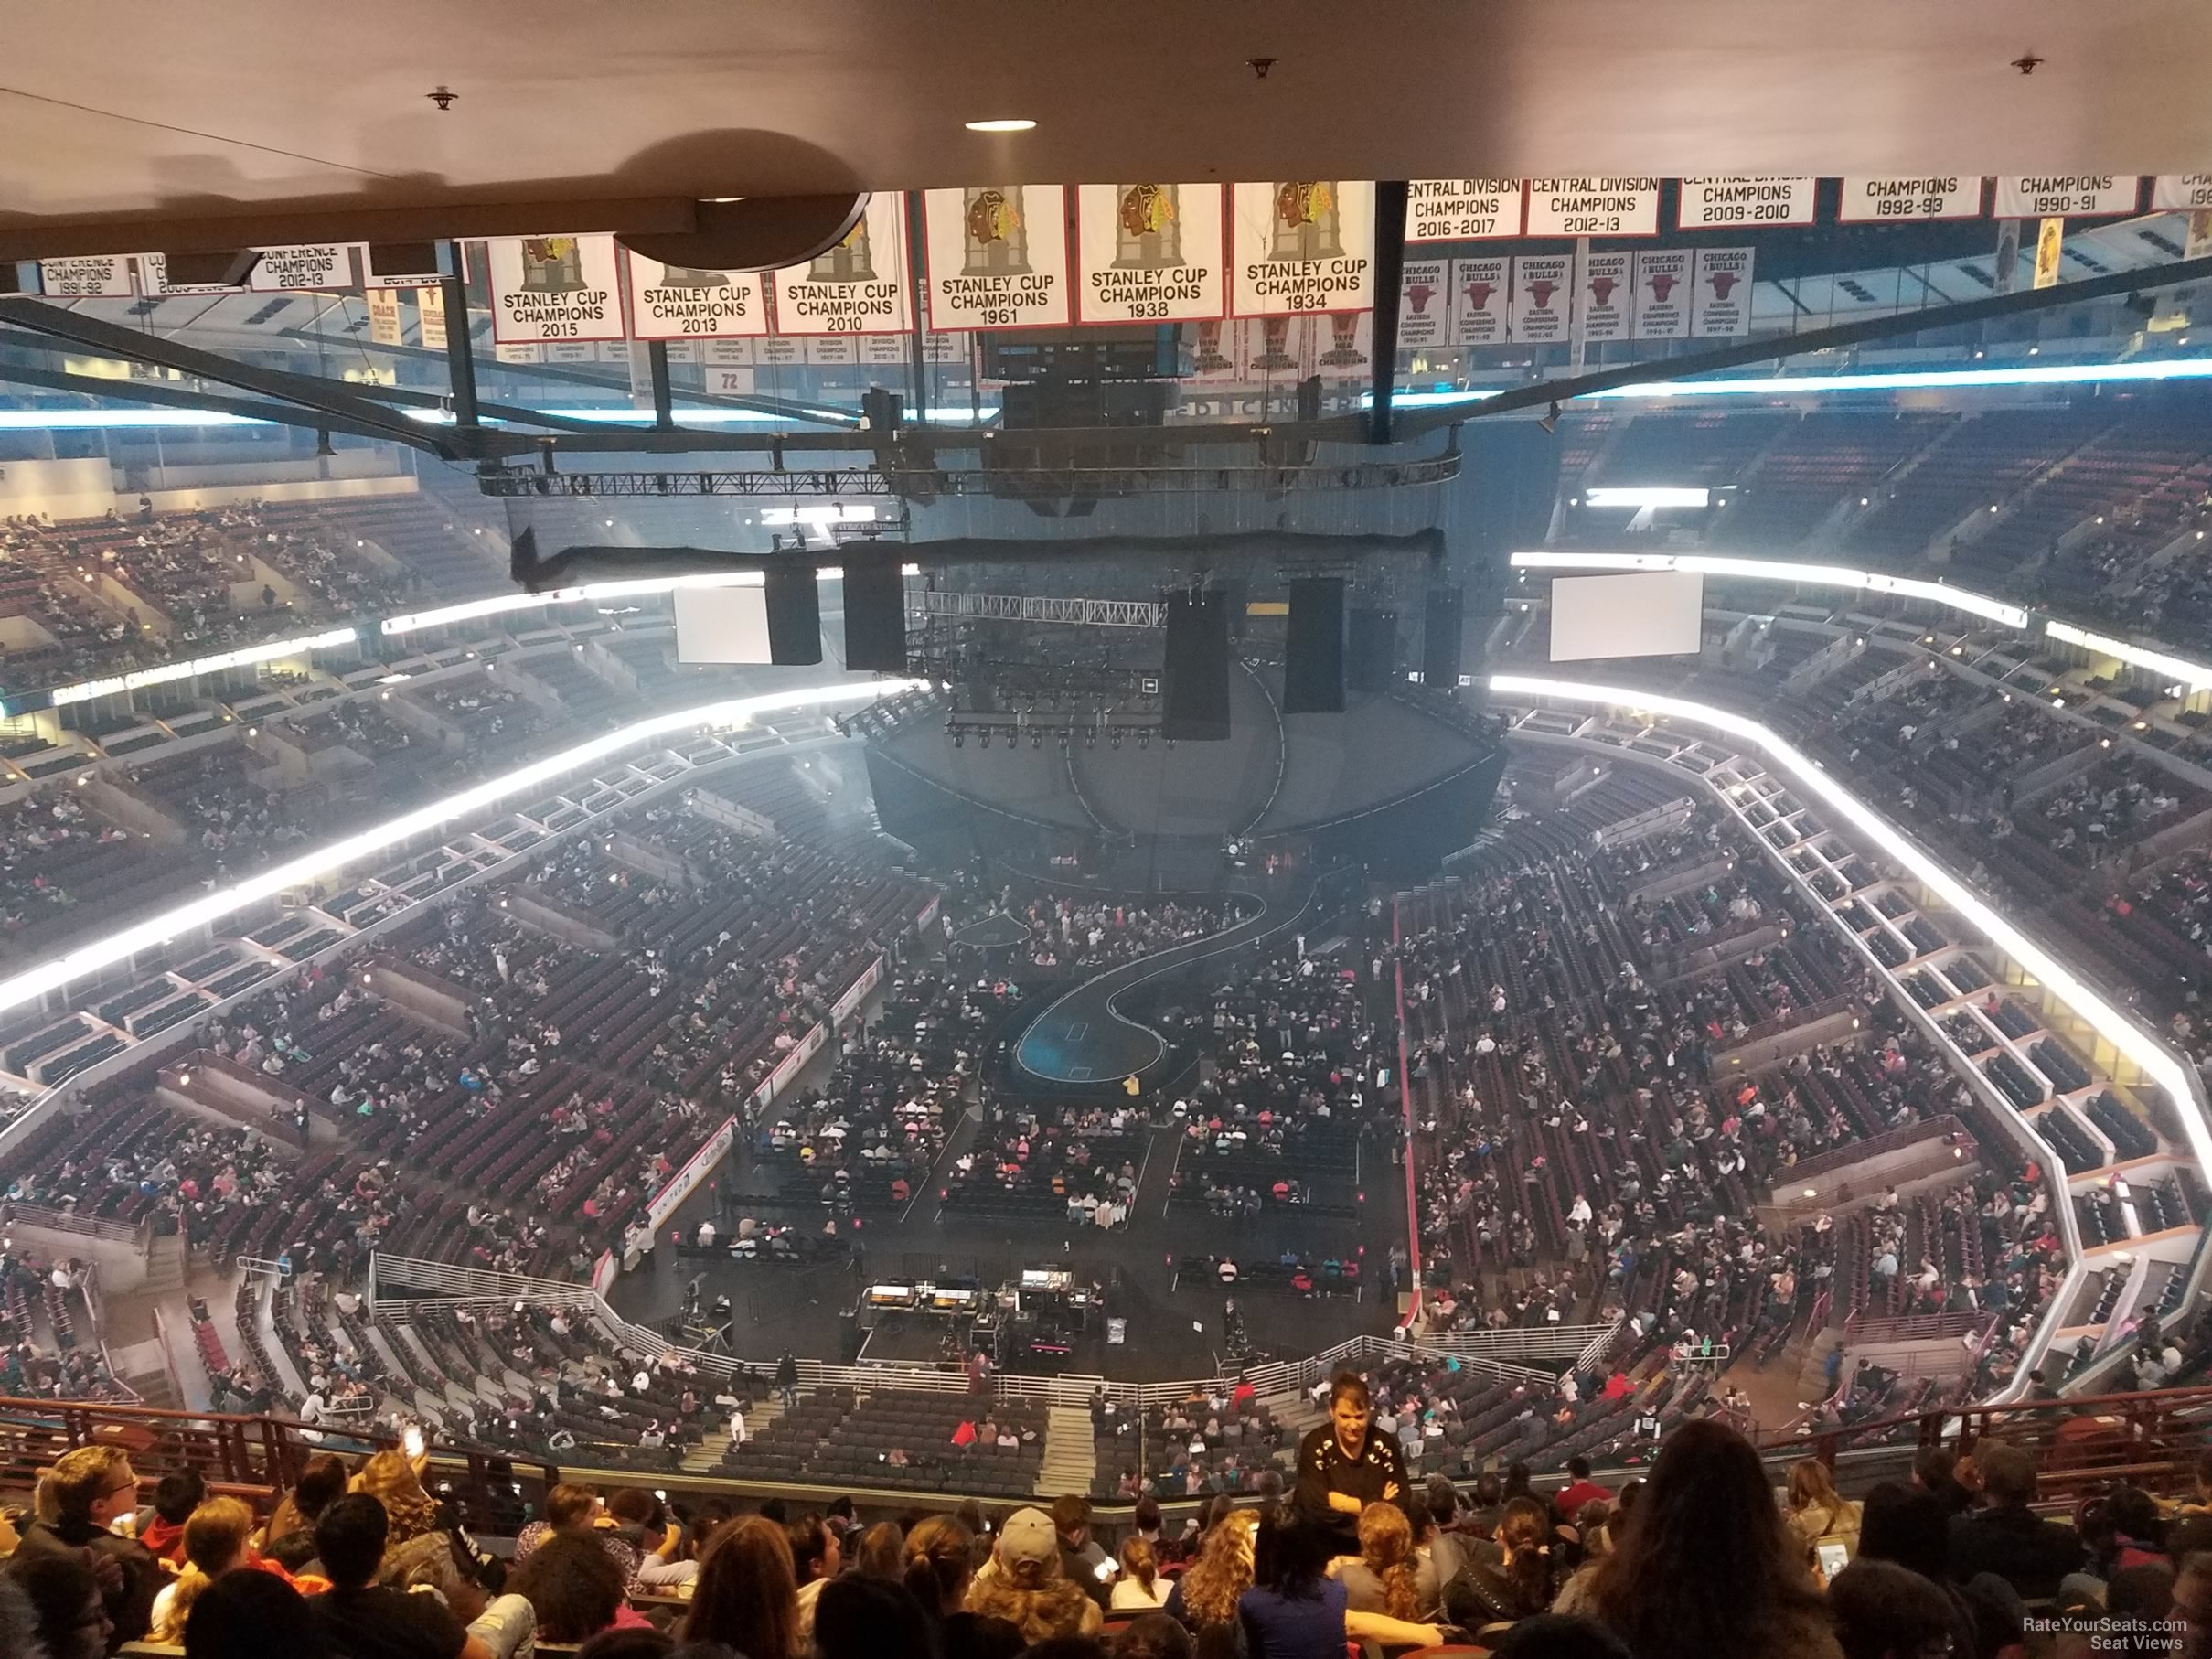 United Center Section 308 Concert Seating - RateYourSeats.com